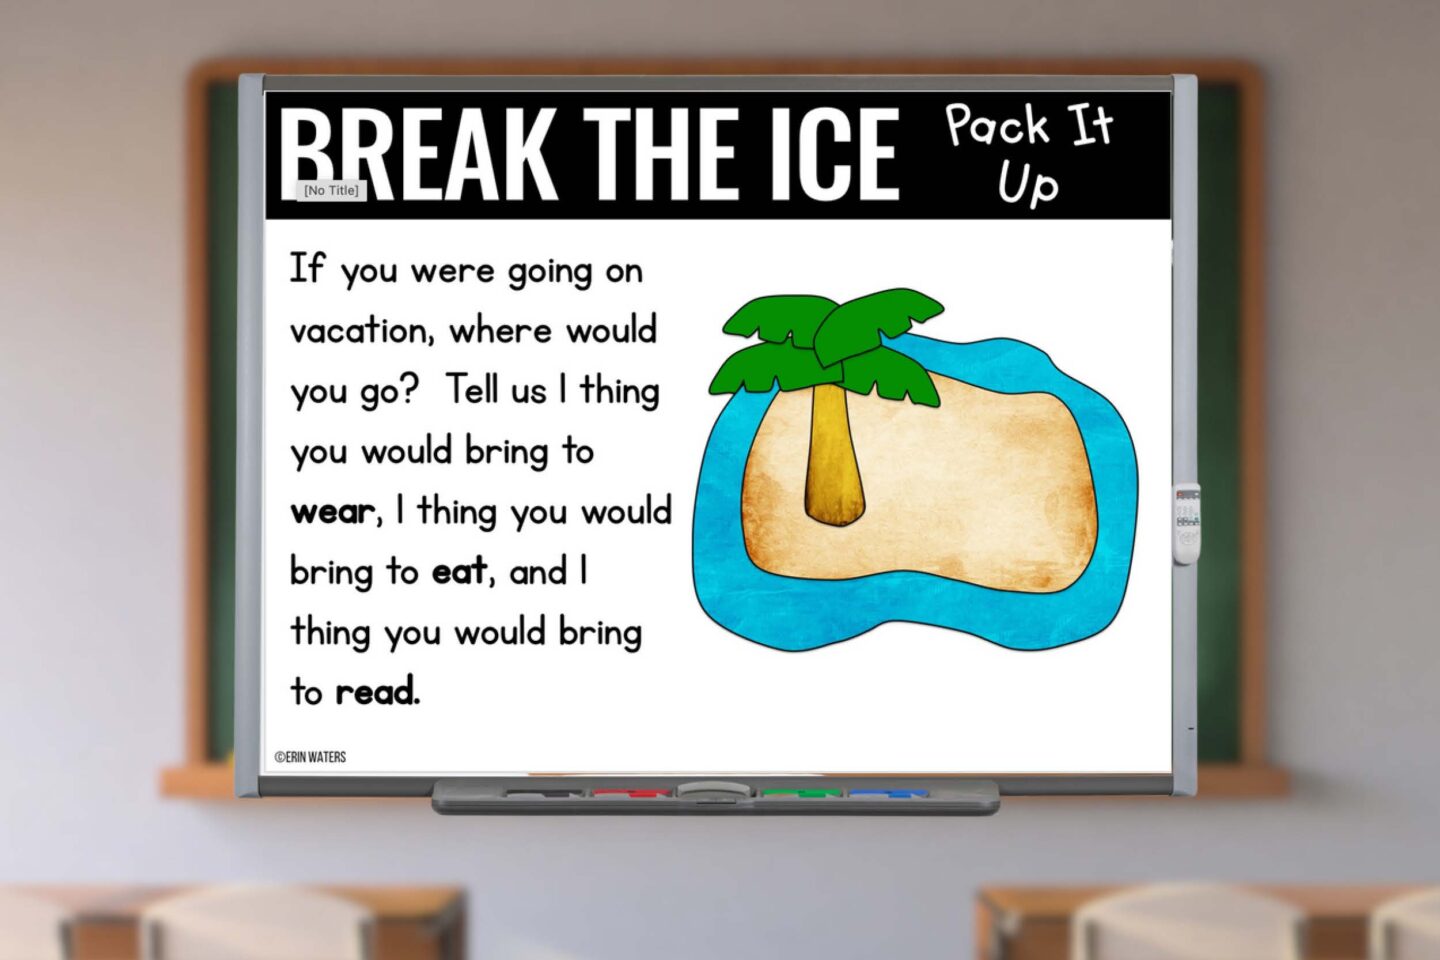 teacher toolkit slide example showing an icebreaker called "Pack it Up" in which students list items they would bring on vacation by category.